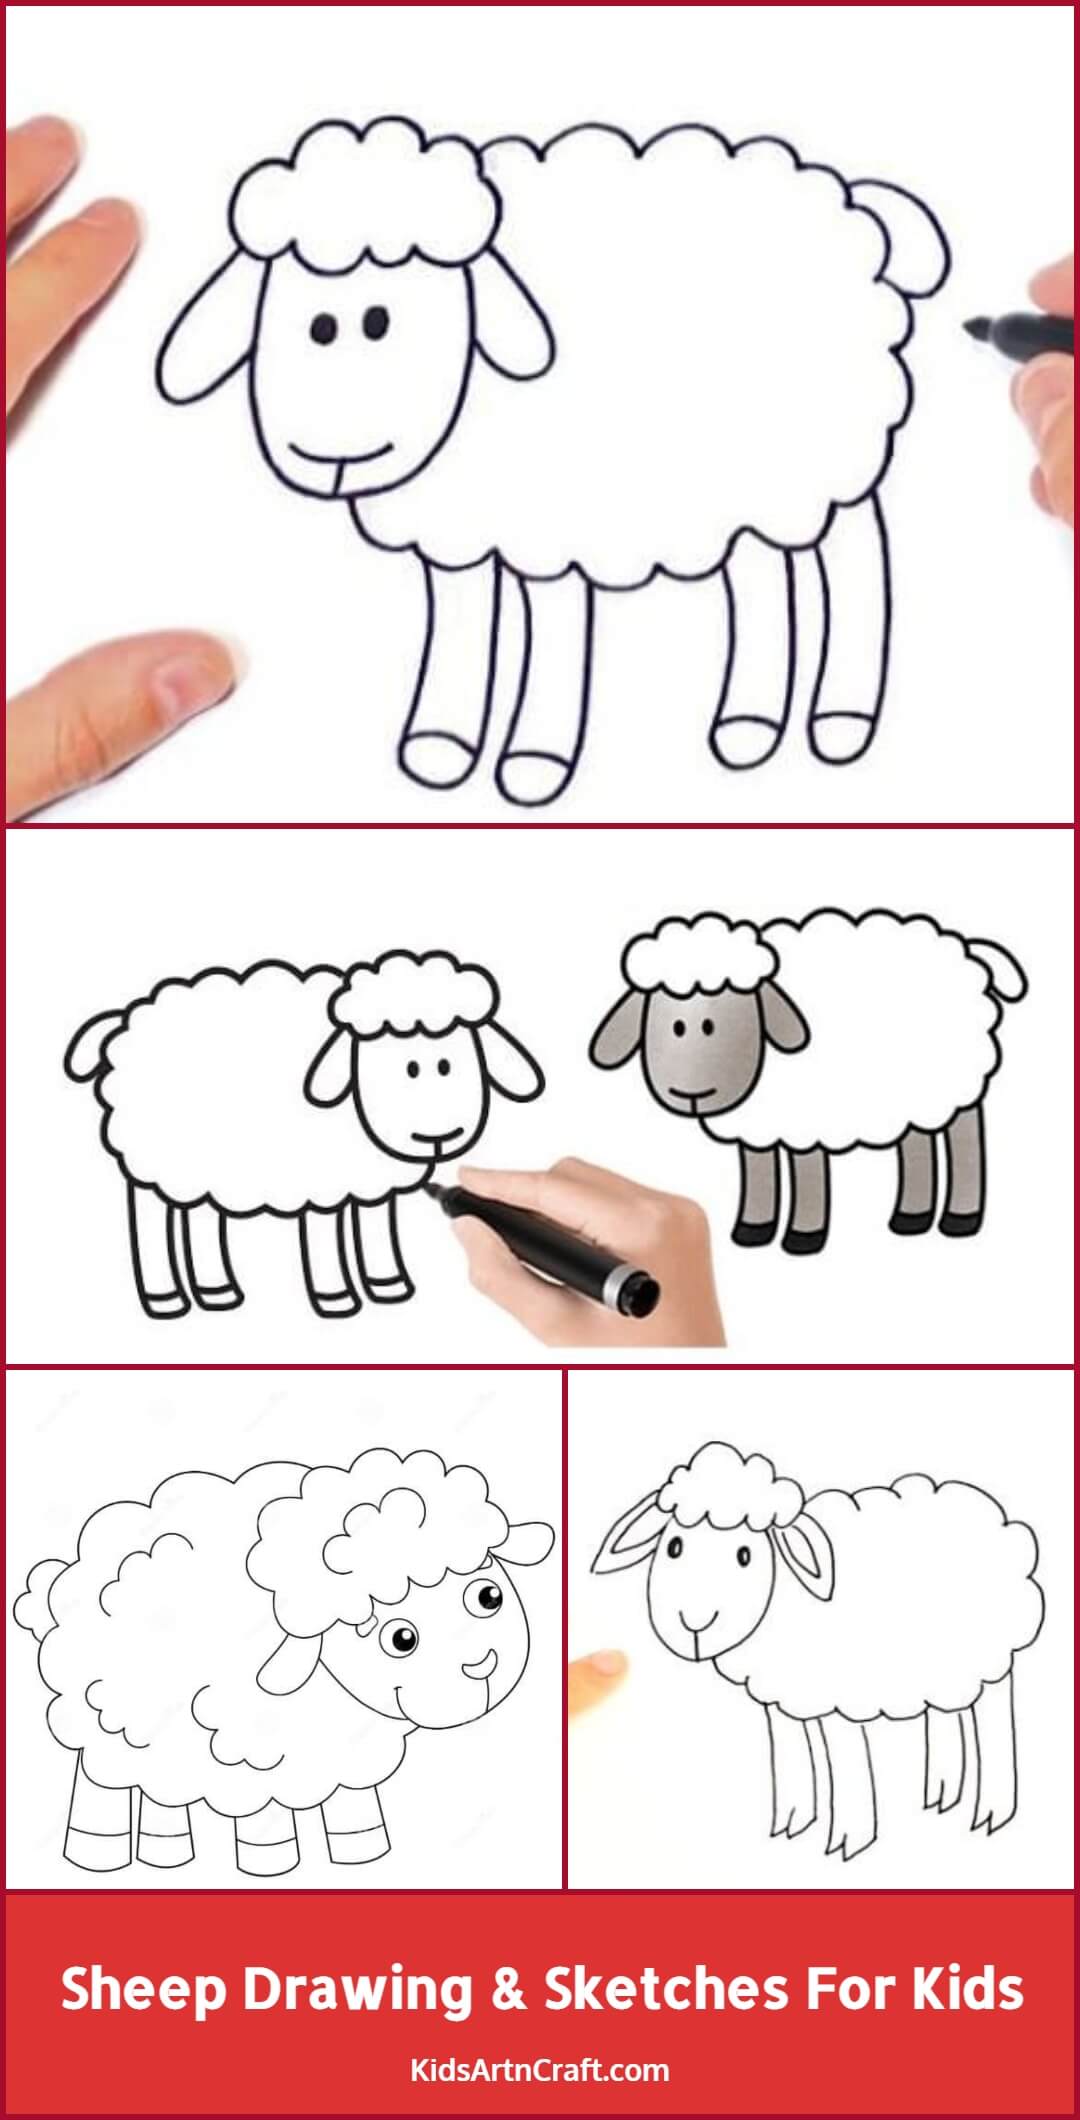 Sheep Drawing & Sketches For Kids